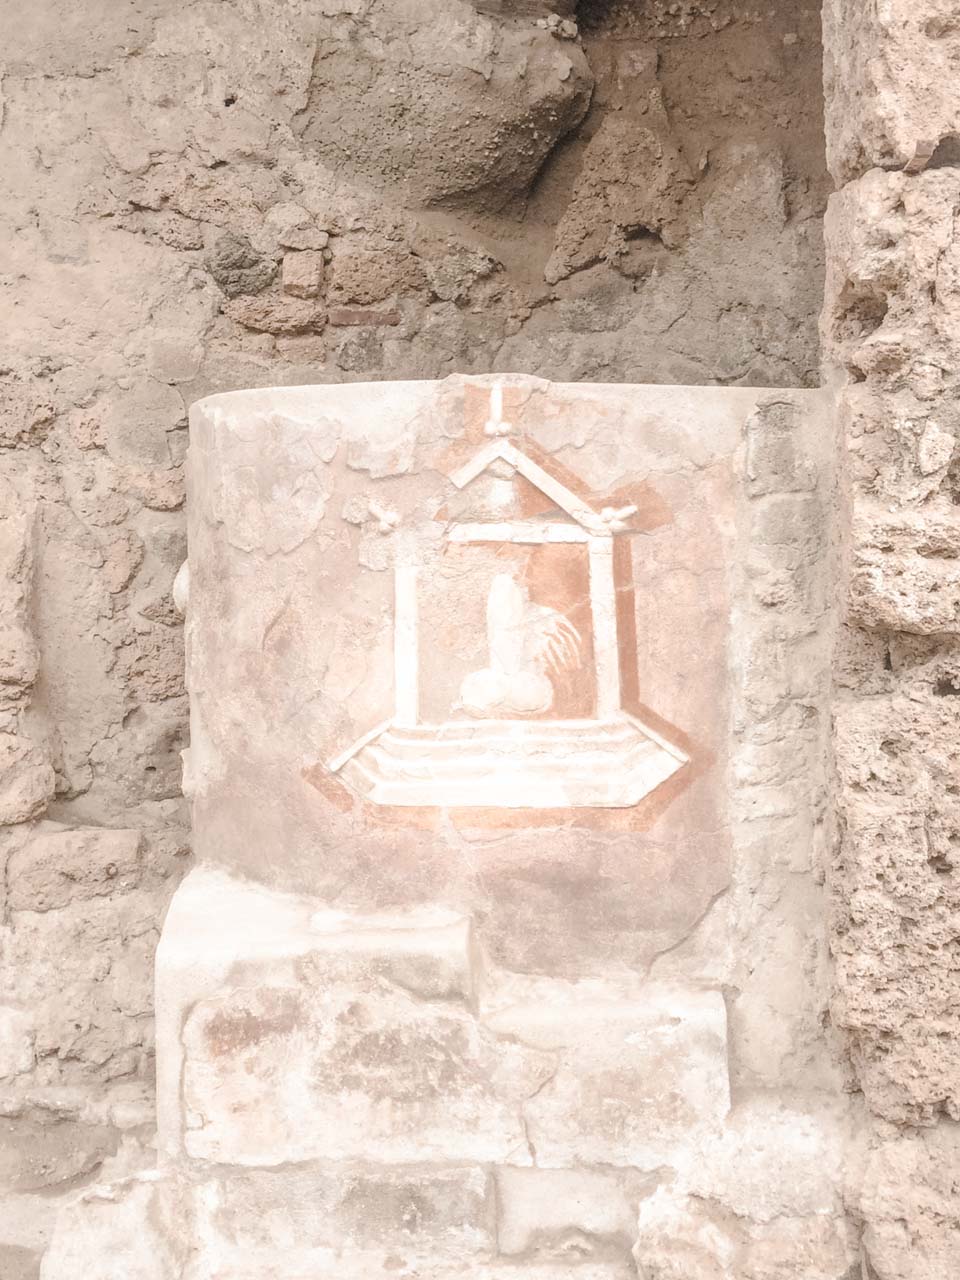 A phallic sculpture marking the entrance to a former brothel inside Pompeii